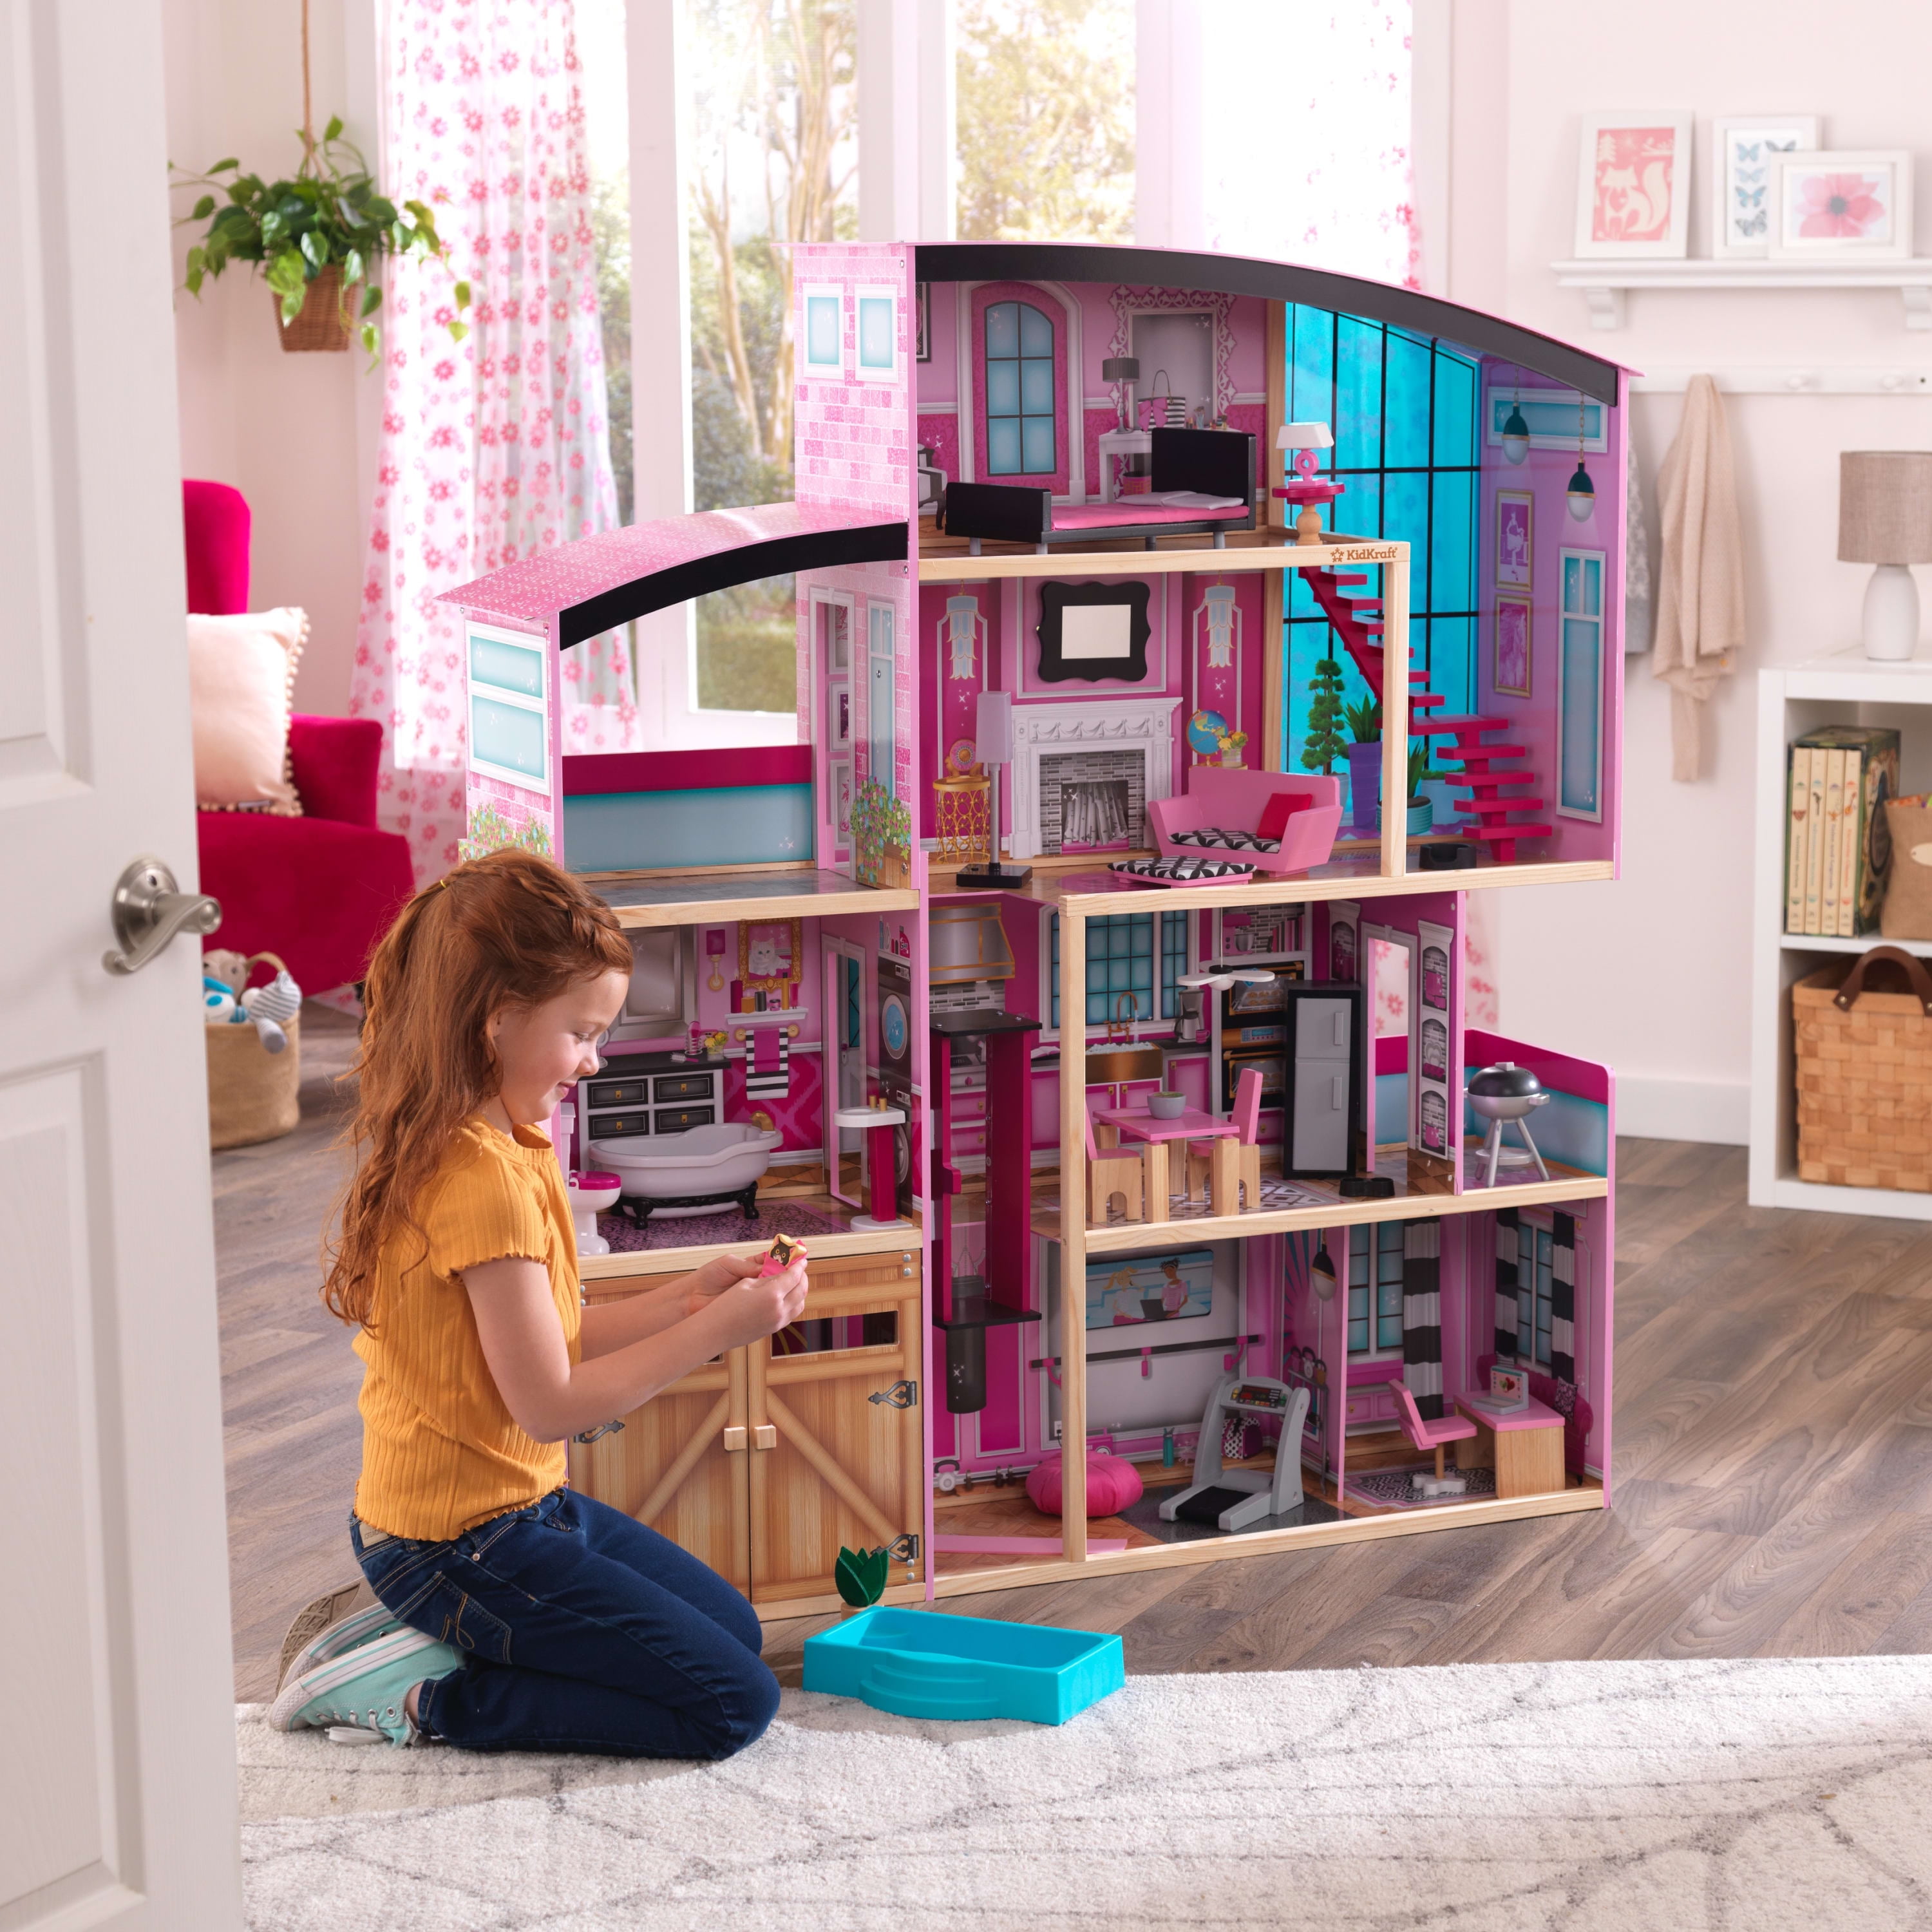 KidKraft Shimmer Mansion Dollhouse Fits 12 inch Dolls Four Story Over 5 Ft Tall 